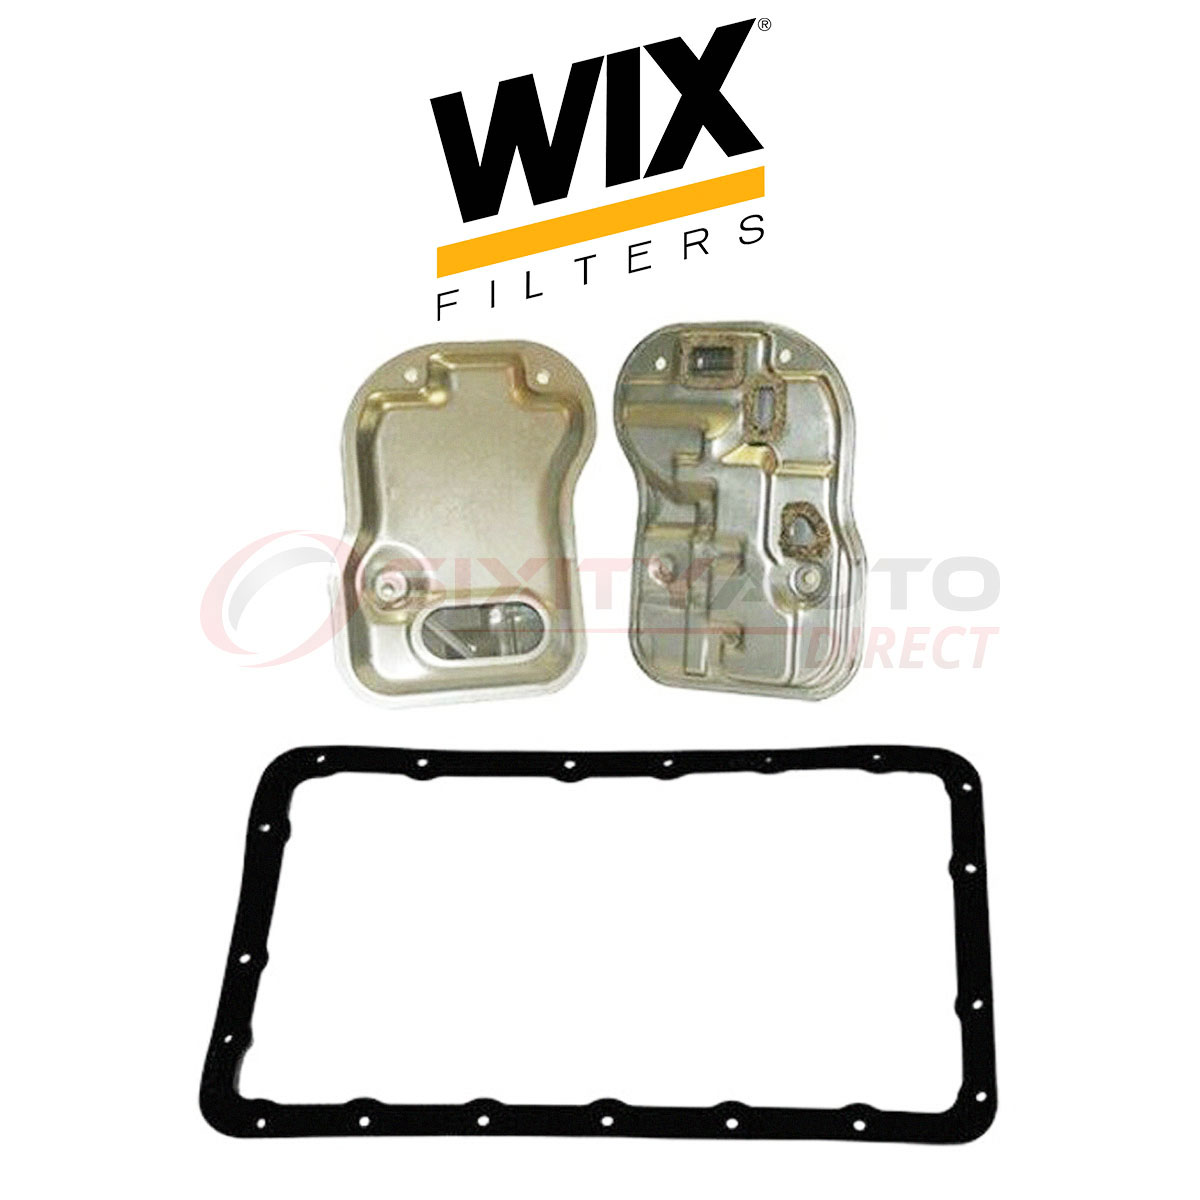 WIX Auto Transmission Filter Kit for 1993-1997 Jeep Grand Cherokee 4.0L 5.2L hp